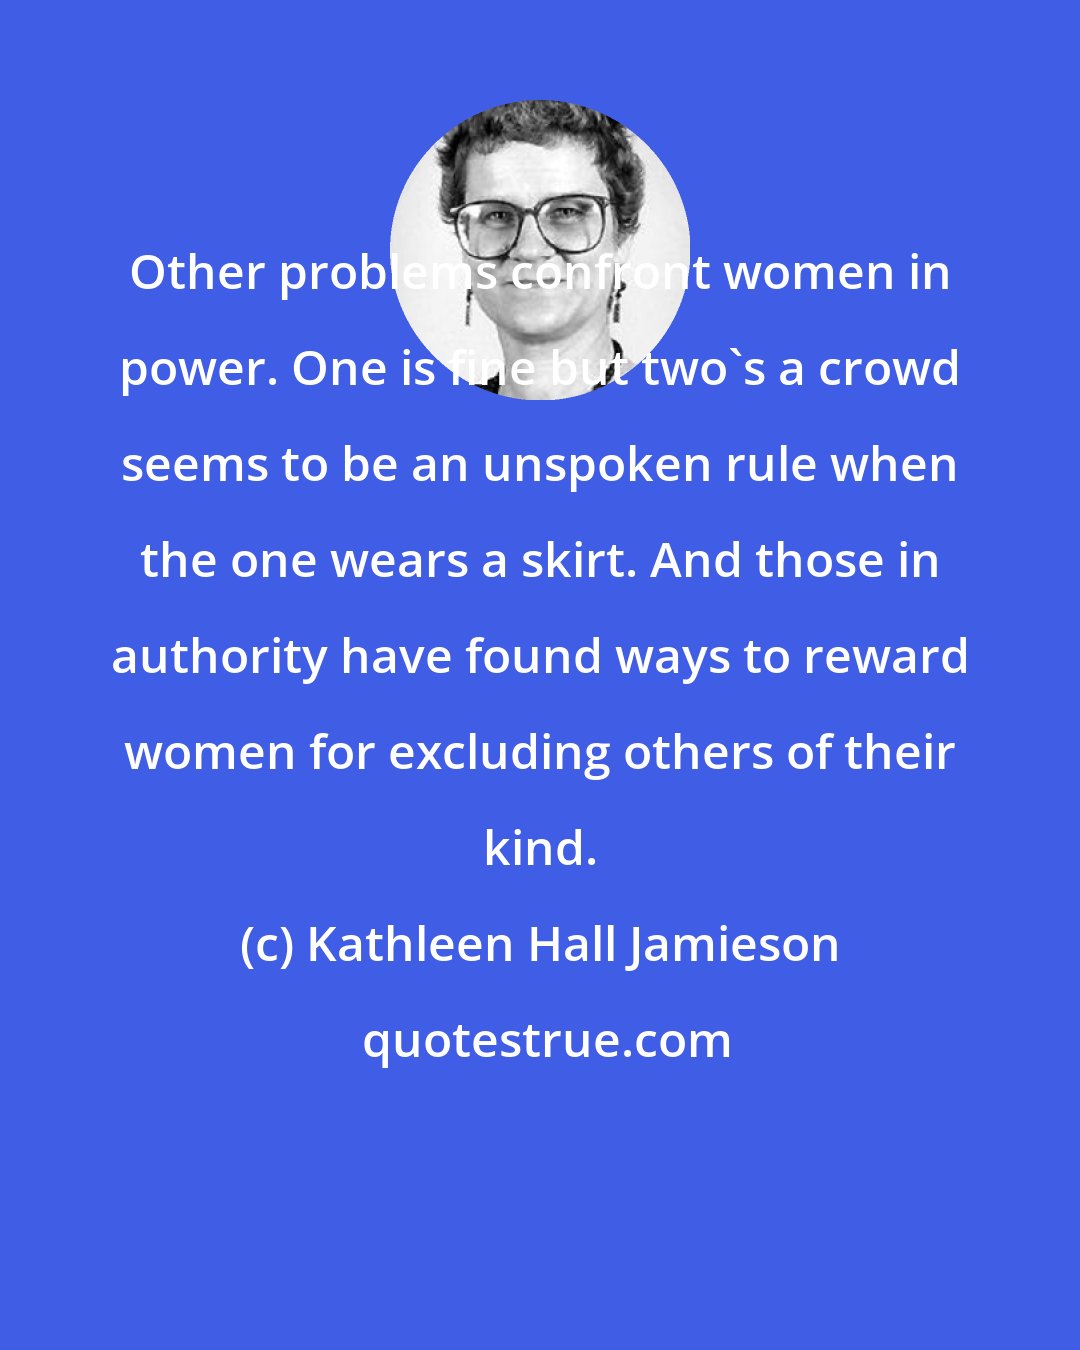 Kathleen Hall Jamieson: Other problems confront women in power. One is fine but two's a crowd seems to be an unspoken rule when the one wears a skirt. And those in authority have found ways to reward women for excluding others of their kind.